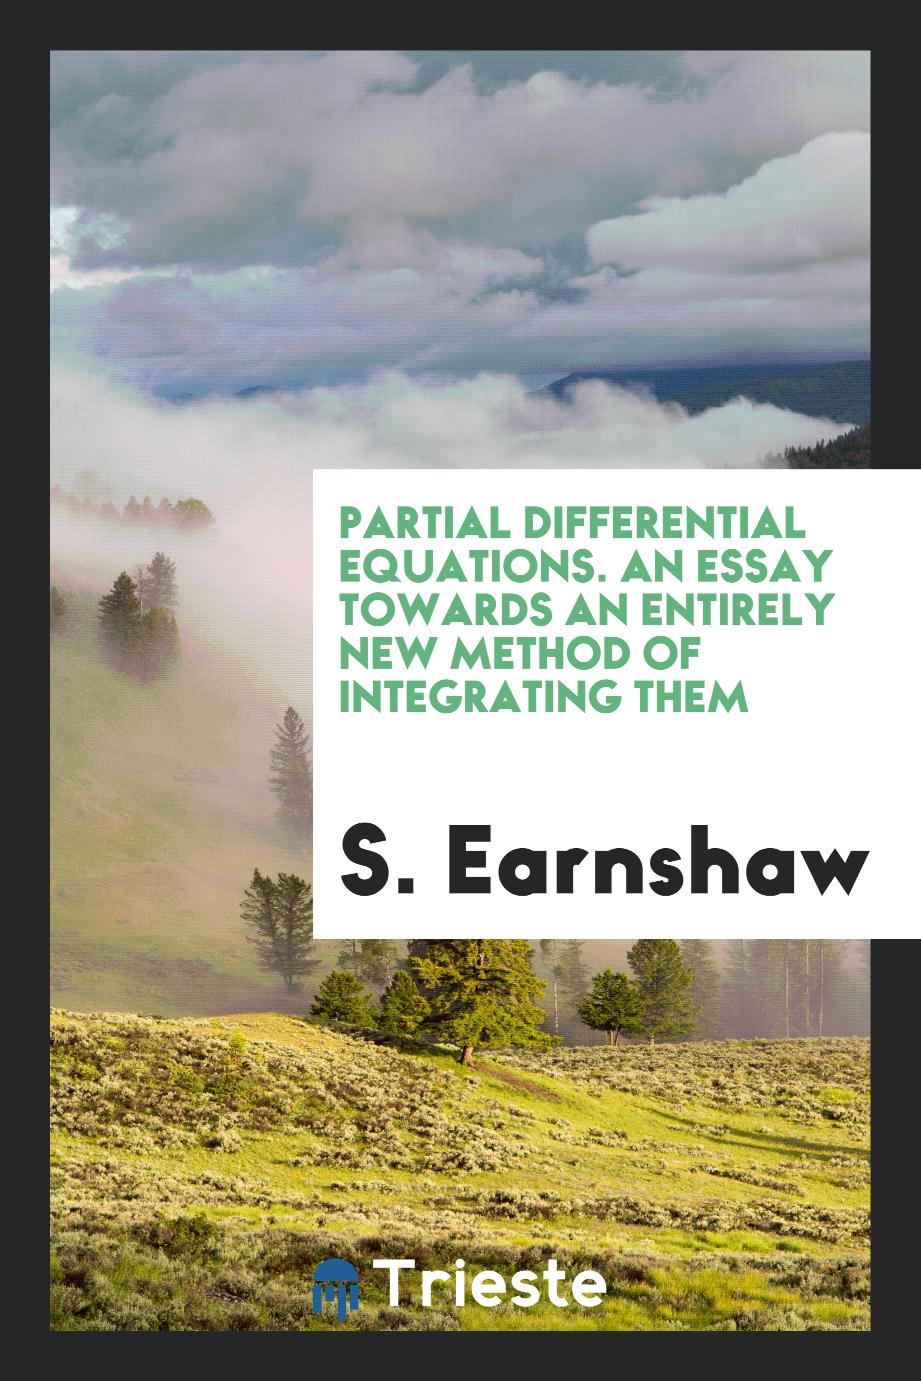 Partial Differential Equations. An Essay Towards an Entirely New Method of Integrating Them